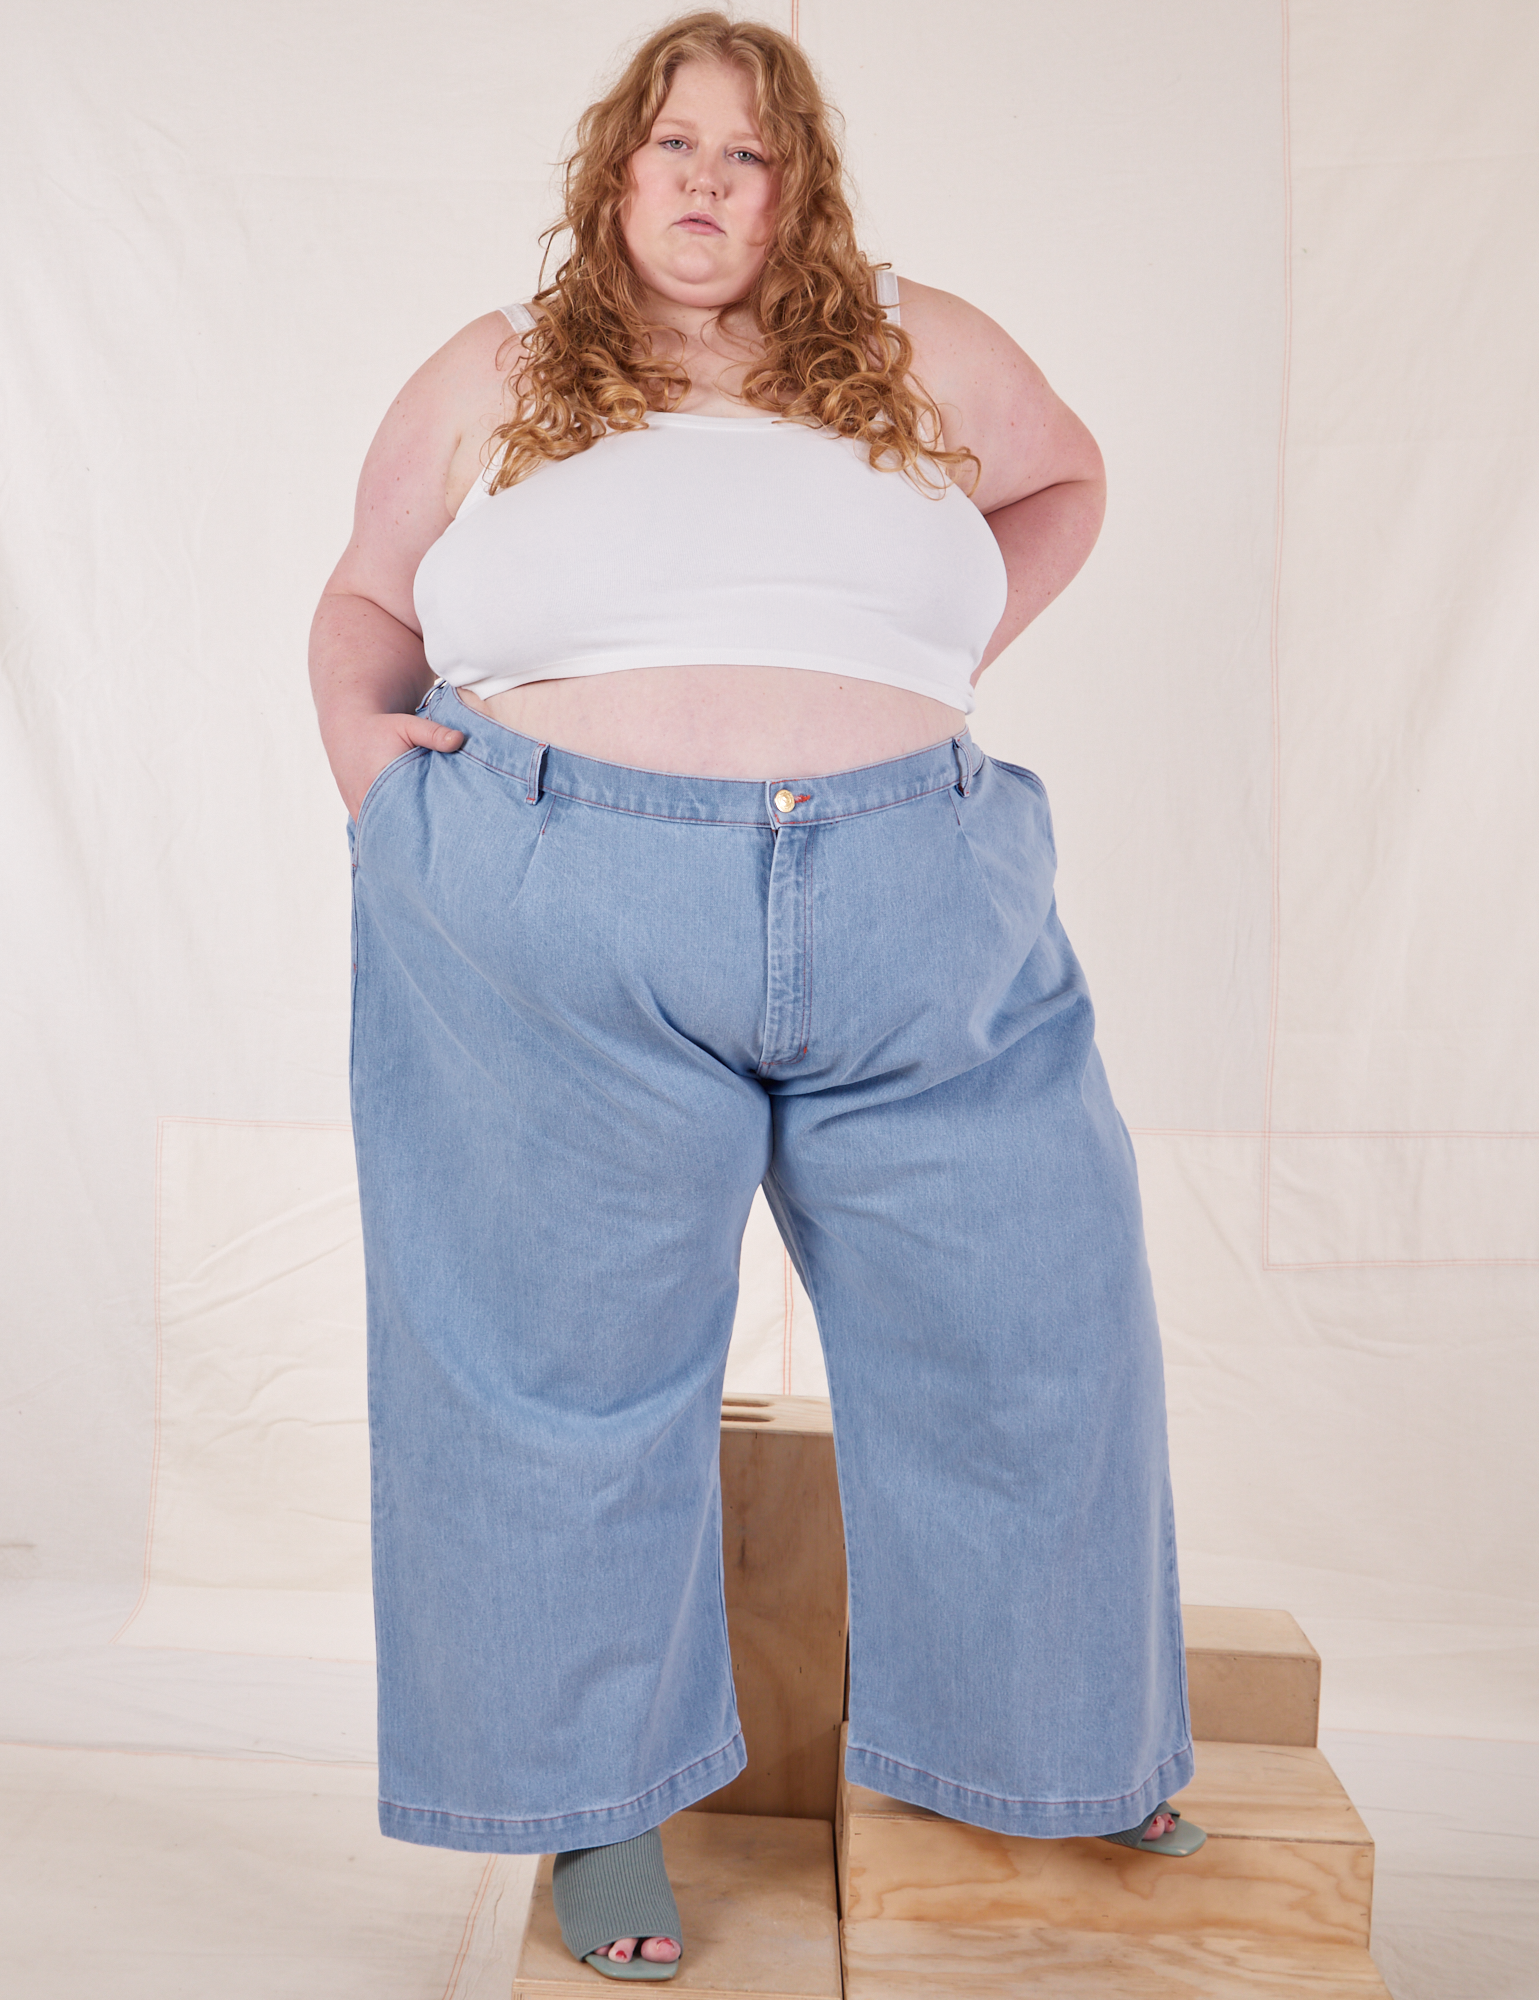 Catie is 5&#39;11&quot; and wearing 4XL Indigo Wide Leg Trousers in Light Wash paired with vintage off-white Cami